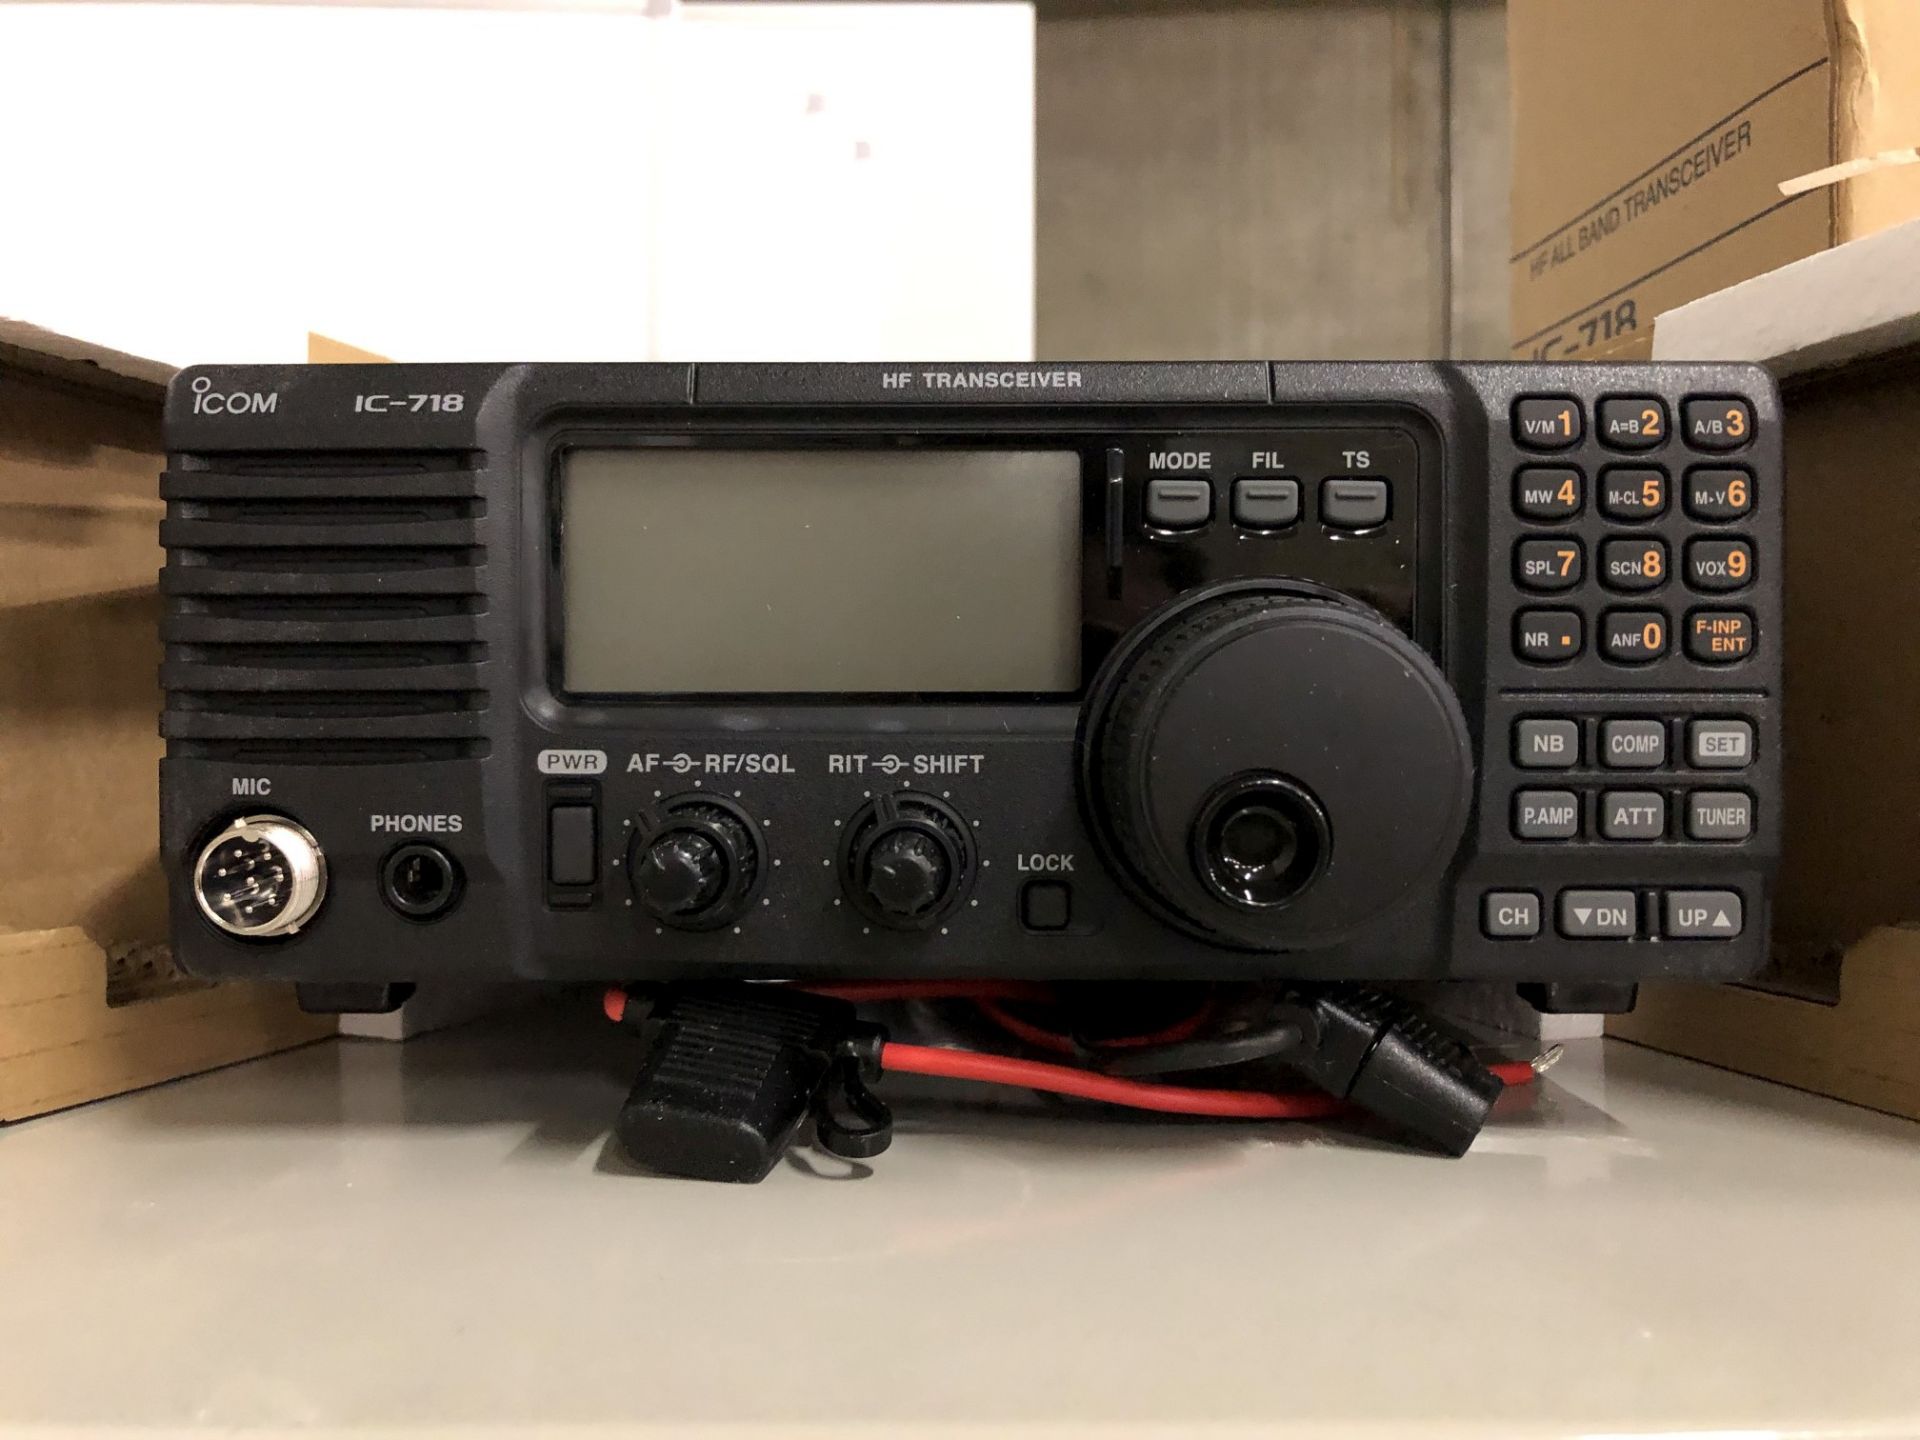 ICOM IC-718 HF Transceiver (New in Box)